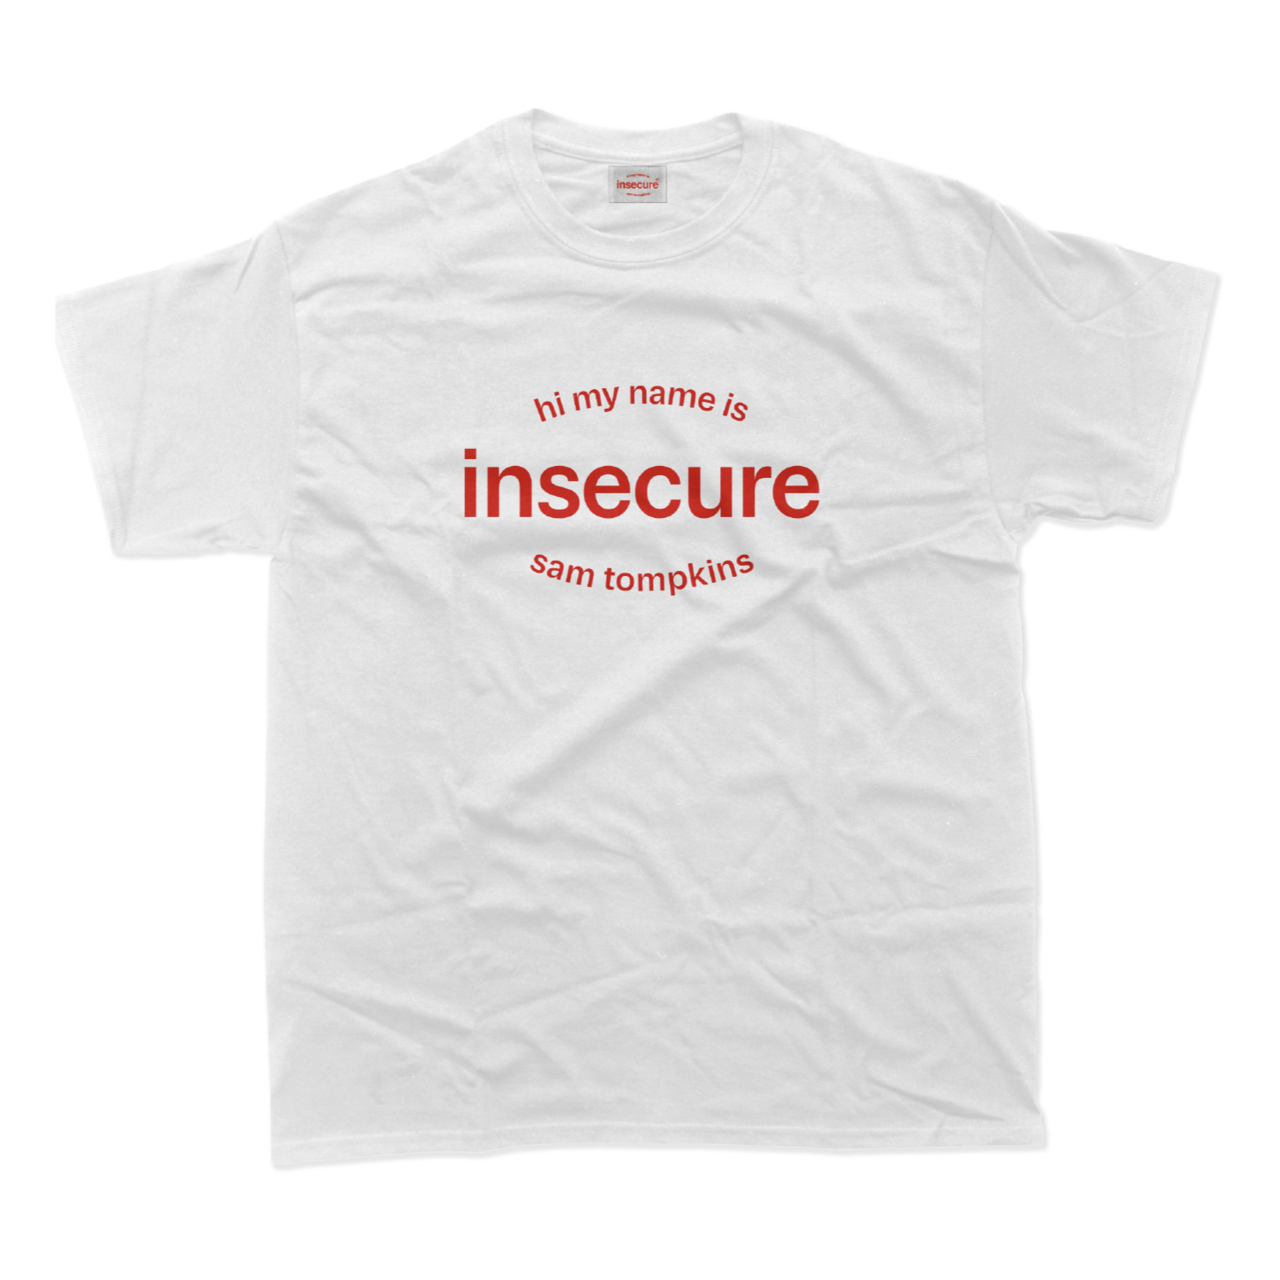 Sam Tompkins - insecure red/white t-shirt